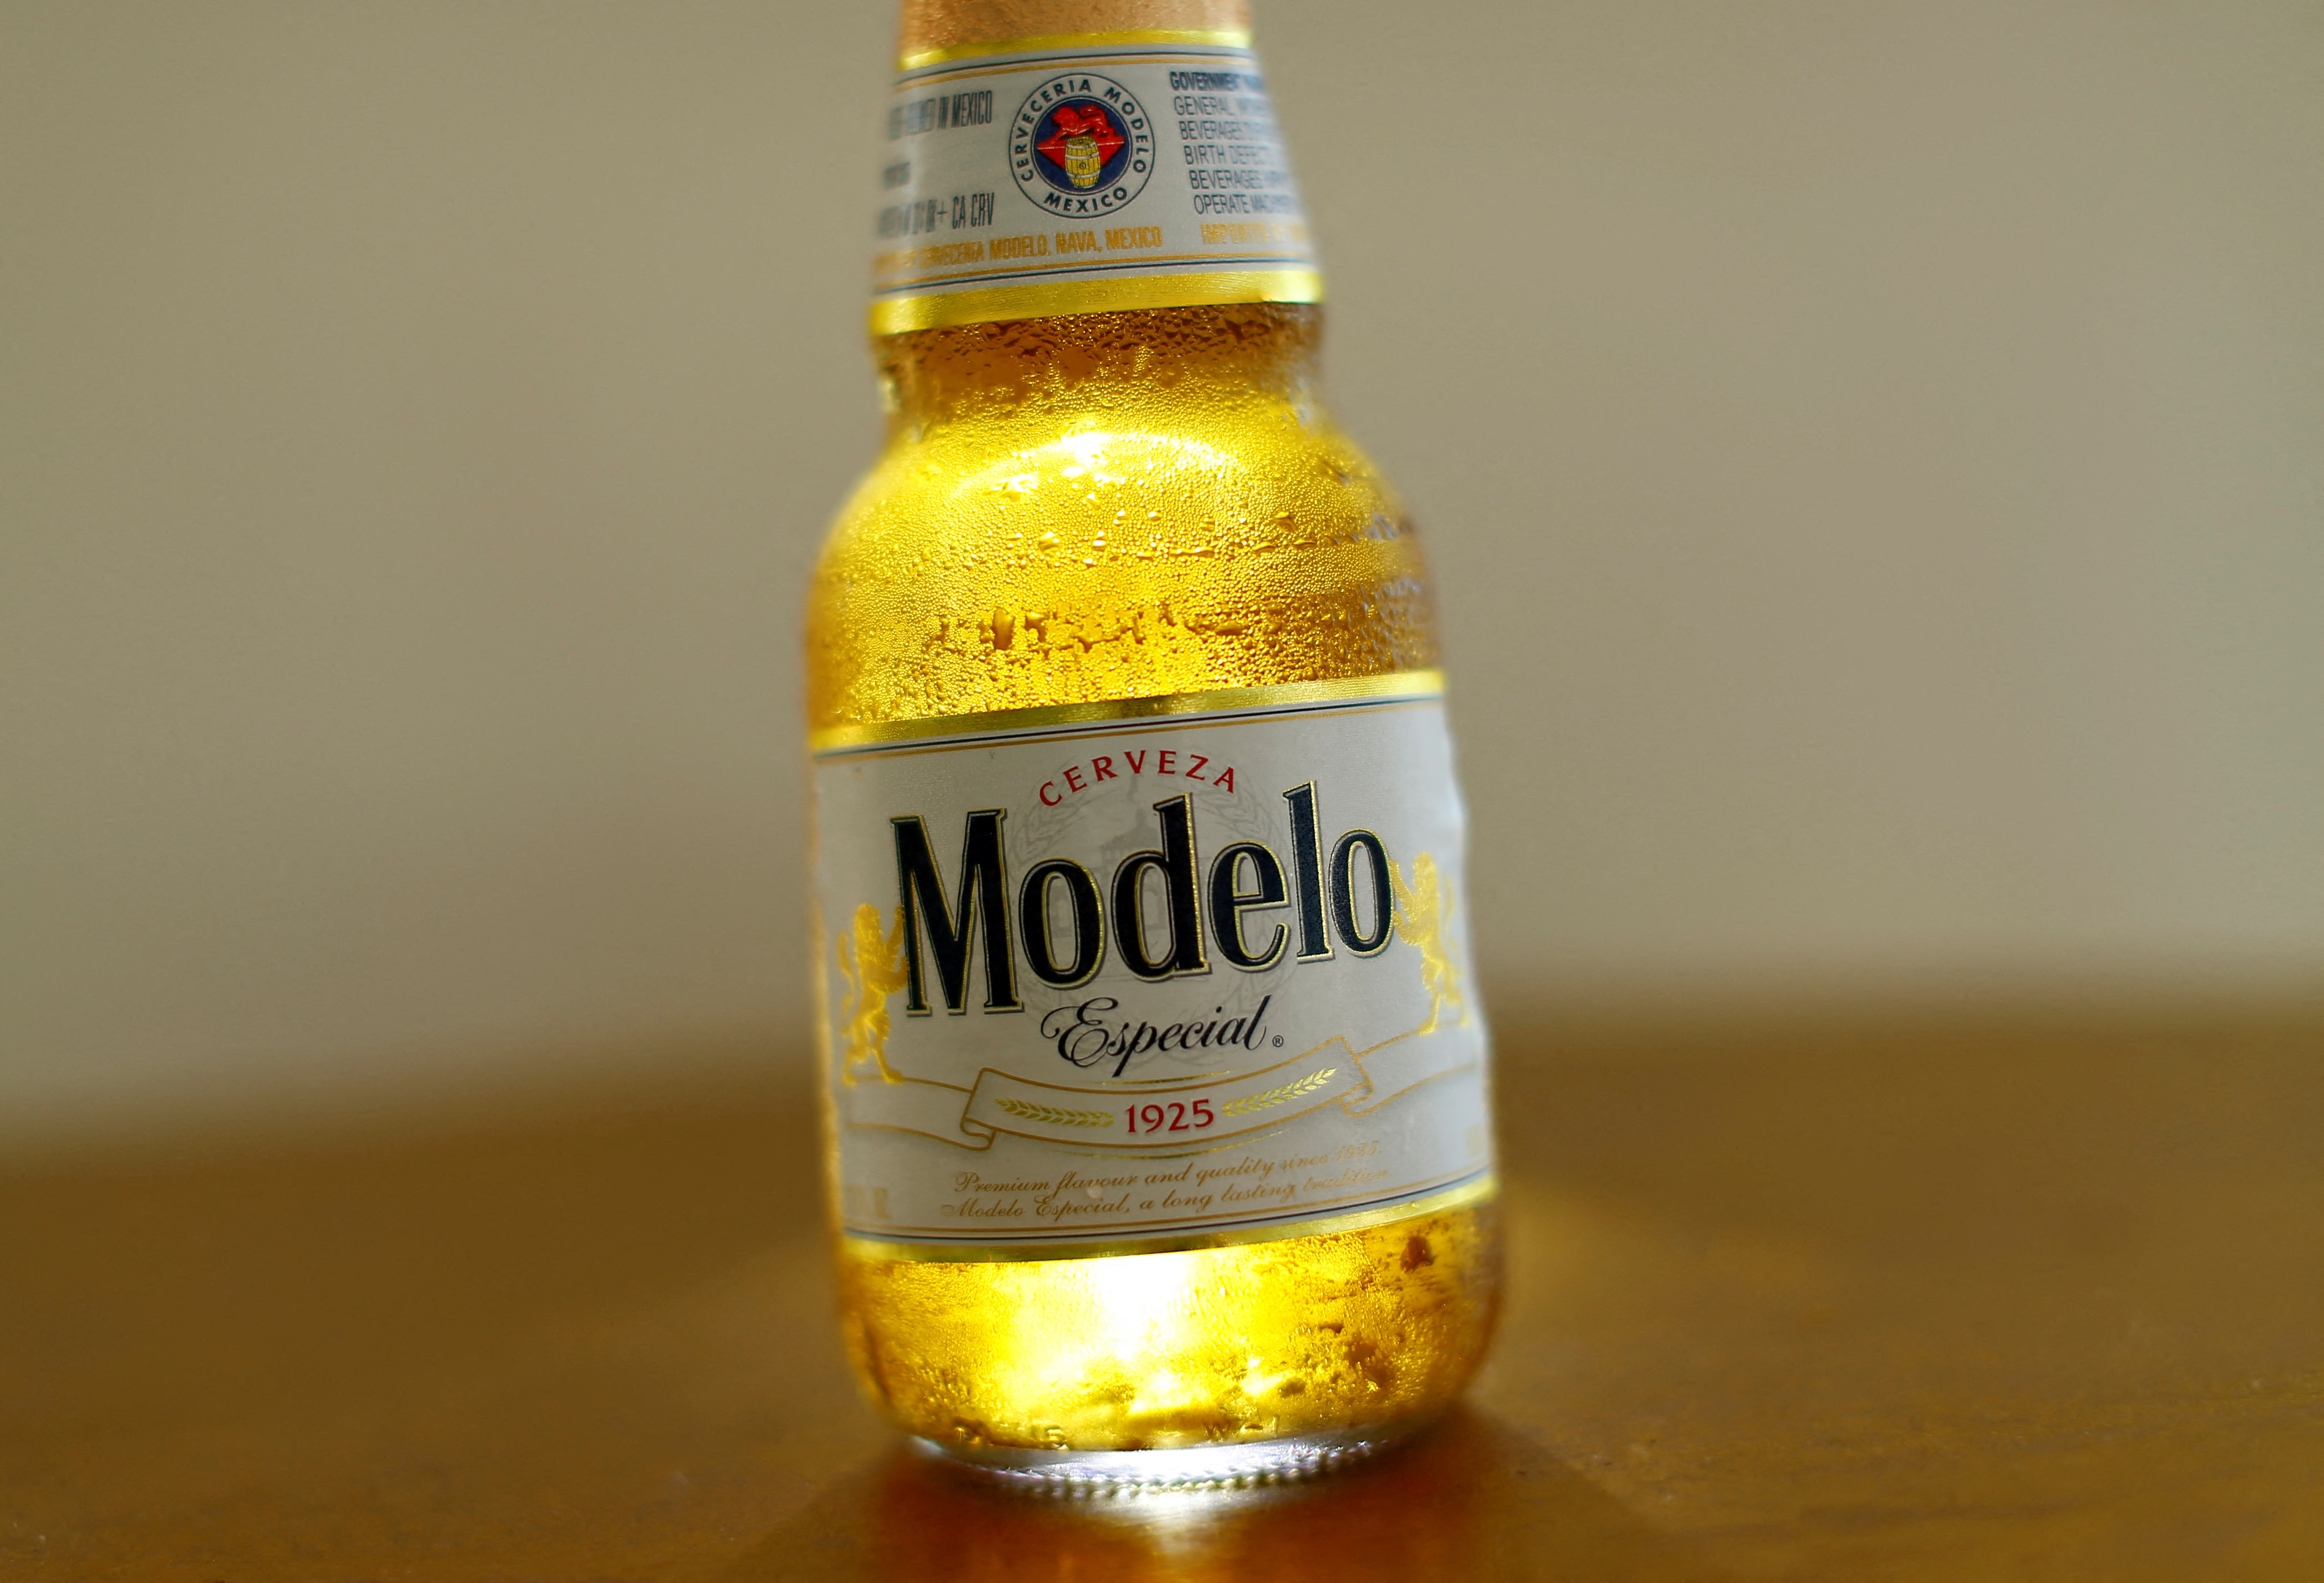 A bottle of Modelo Especial beer, one of Constellation Brands Inc products, is shown in this  illustration photograph taken in Encinitas, California, U.S. June 27, 2016.  REUTERS/Mike Blake/File Photo